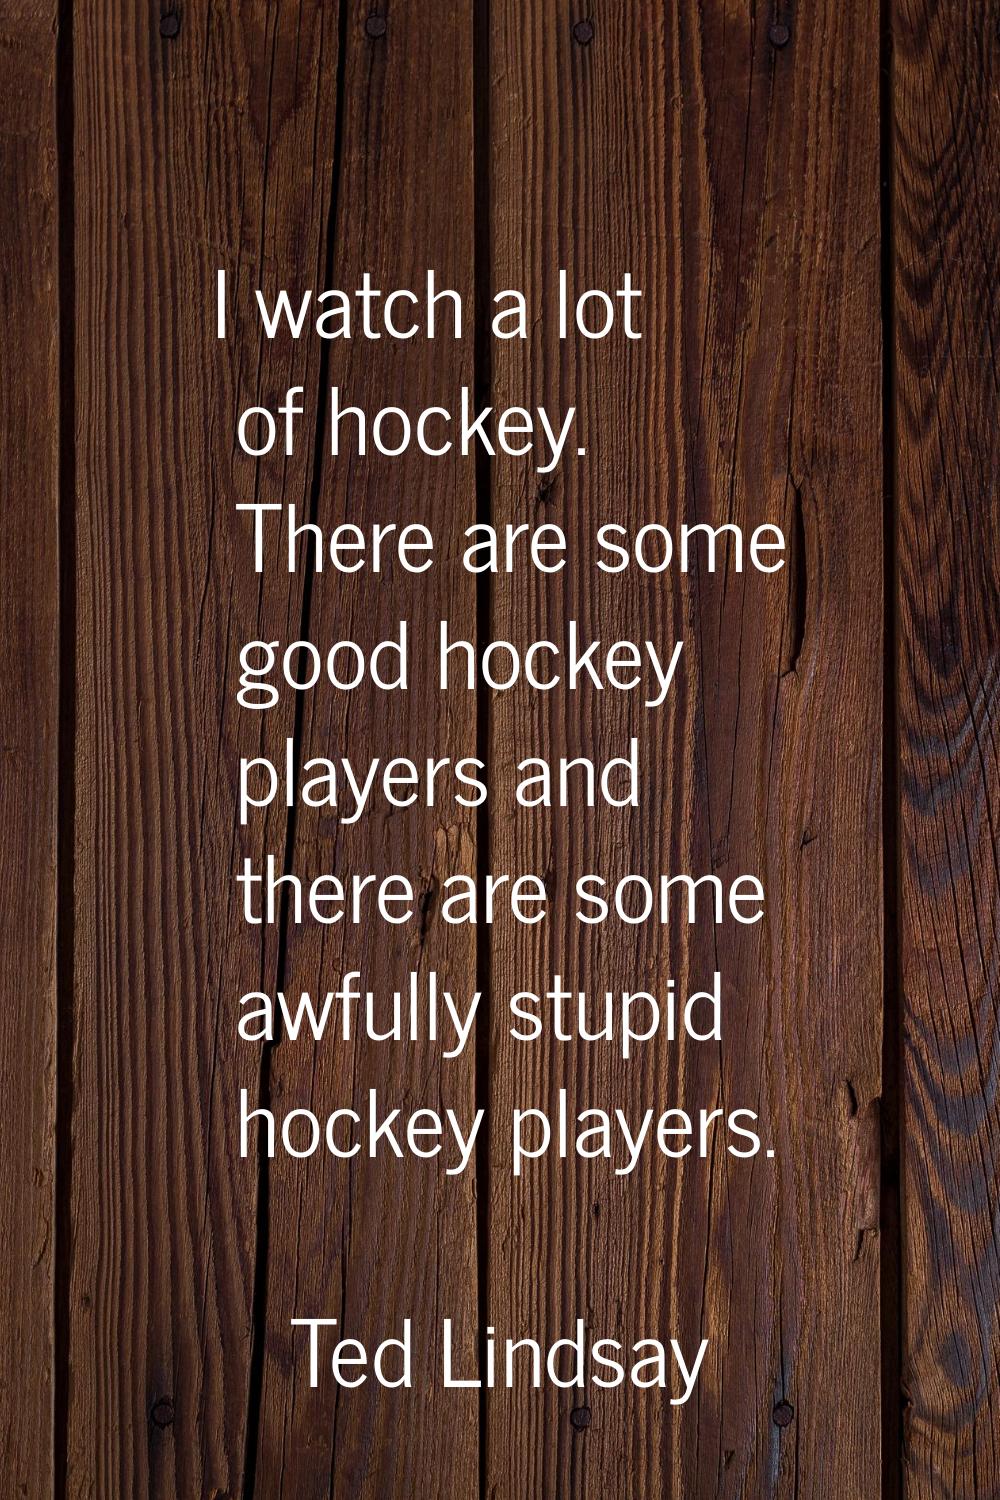 I watch a lot of hockey. There are some good hockey players and there are some awfully stupid hocke